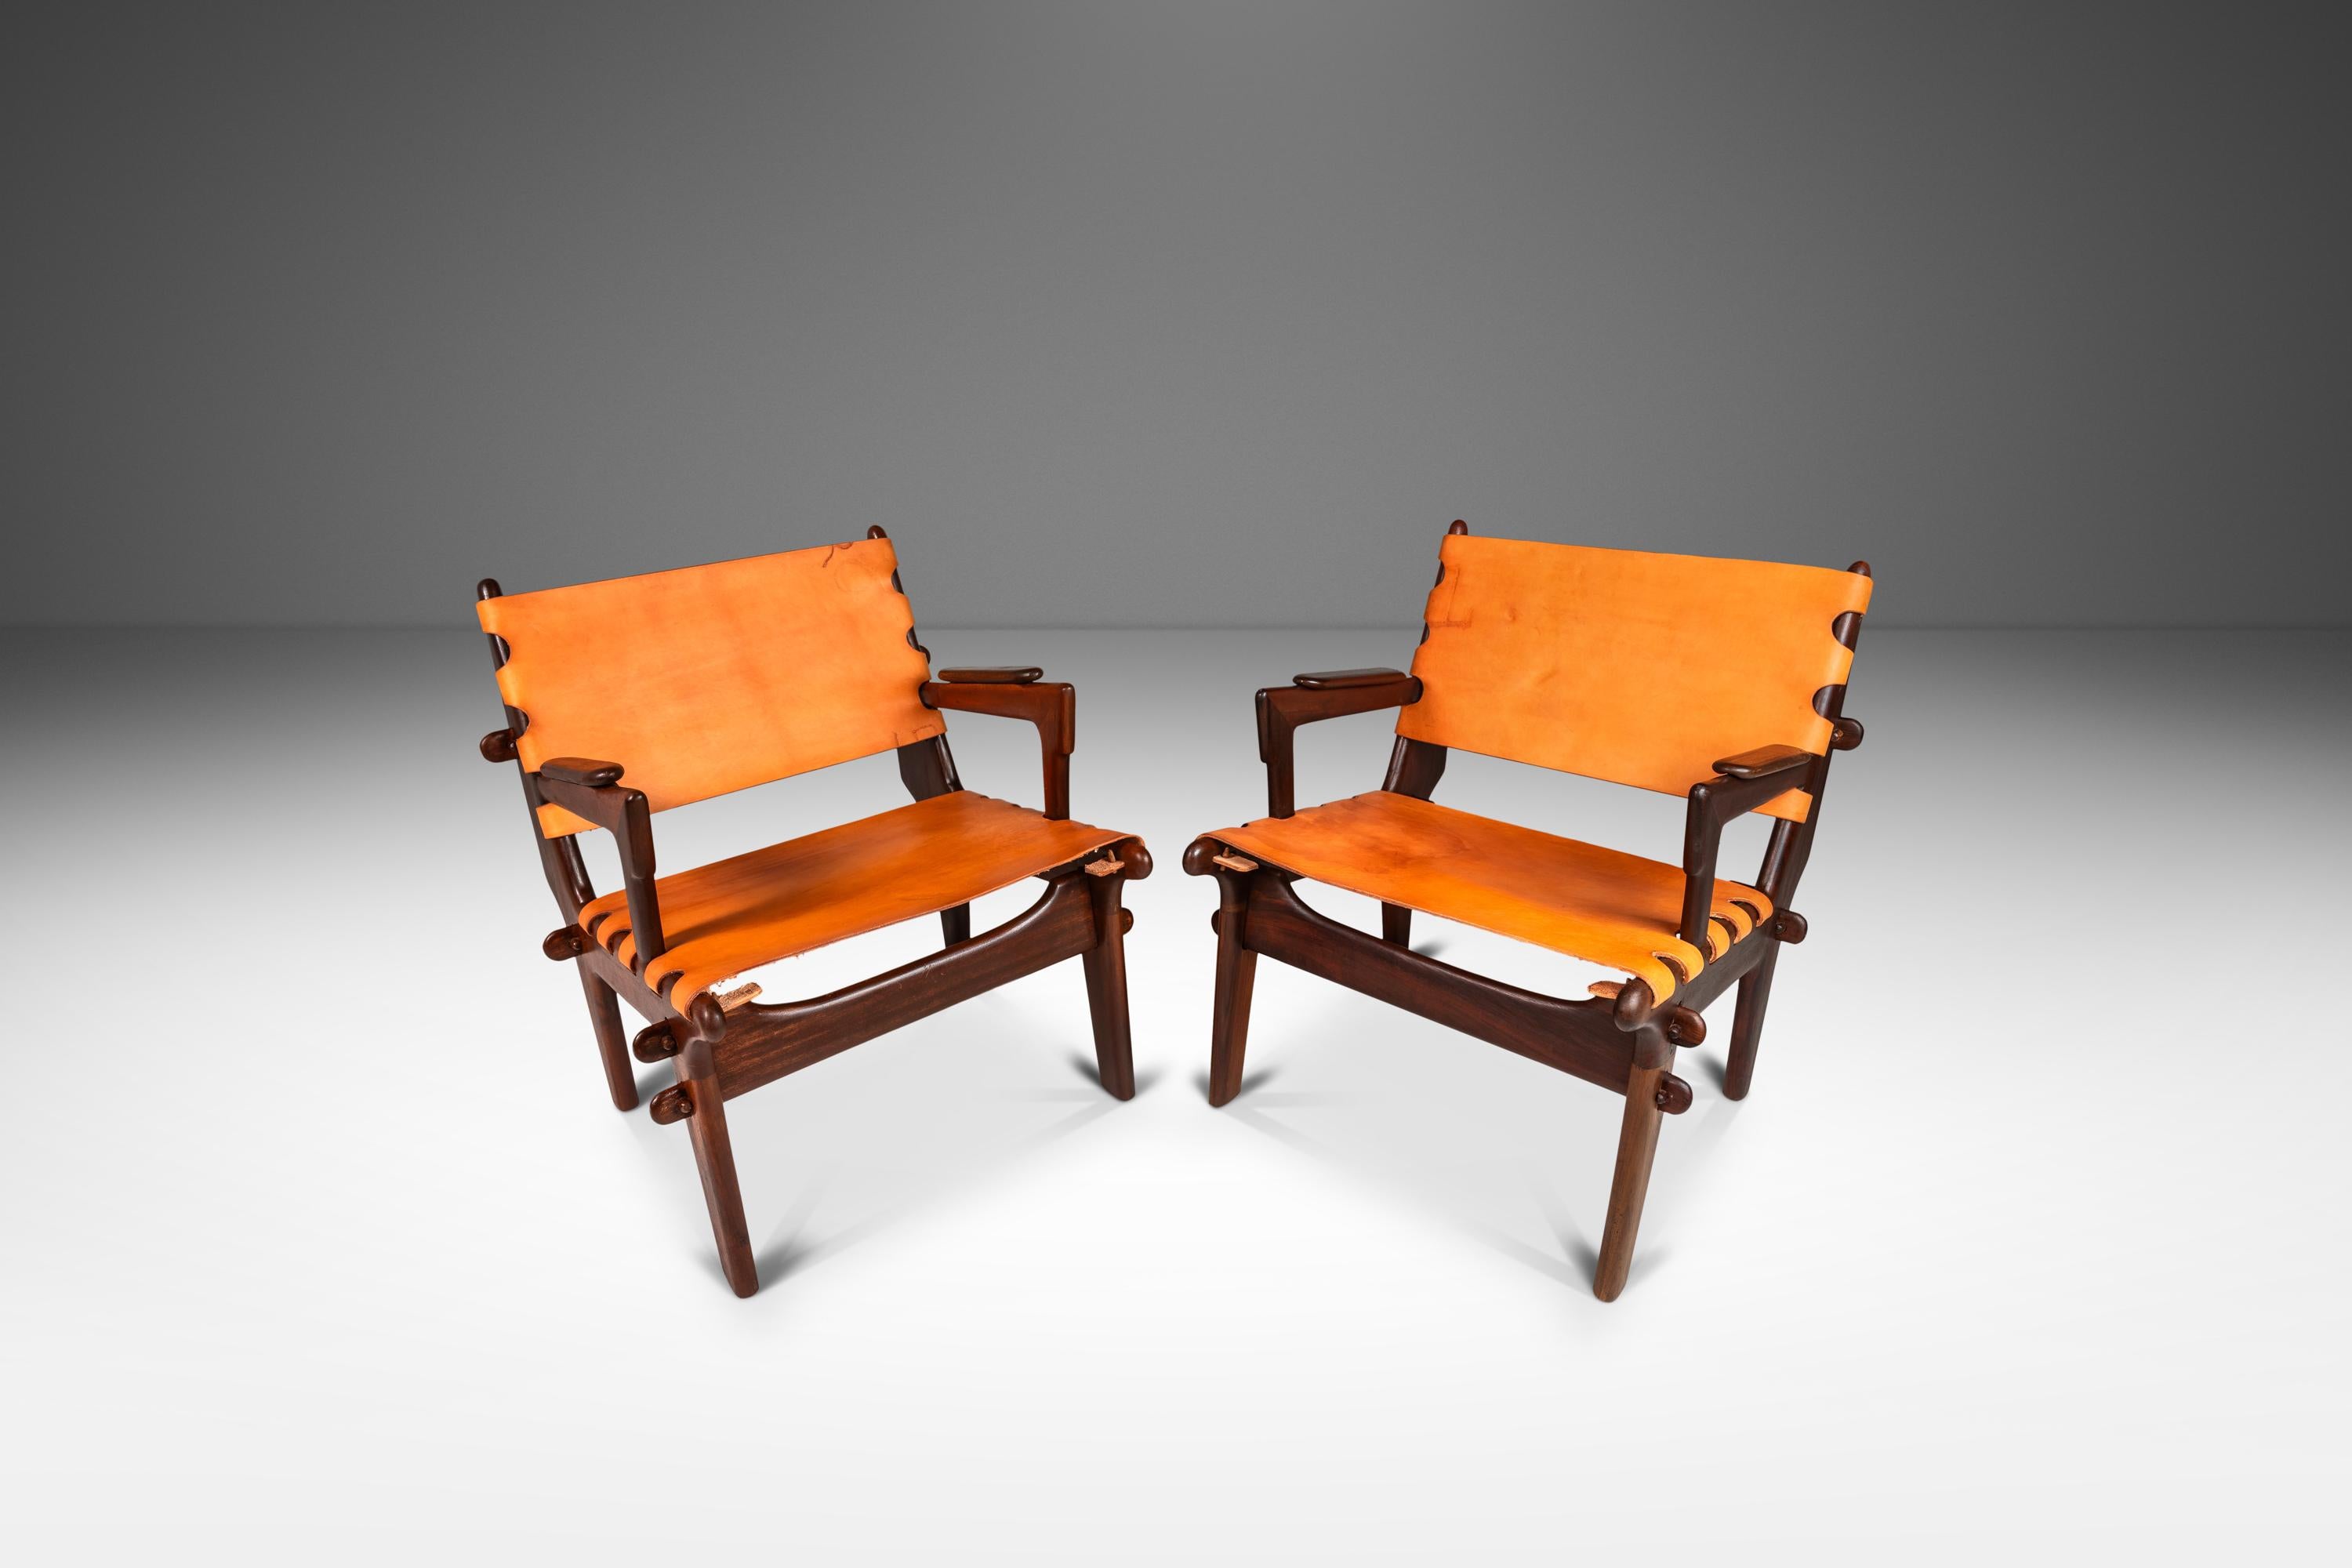  Introducing a rare set of sling chairs by the incomparable Angel Pazmino. Recently and painstakingly restored by our team of craftsmen this iconic set has a new lease on life and we love the results. The solid jacaranda wood frames have been